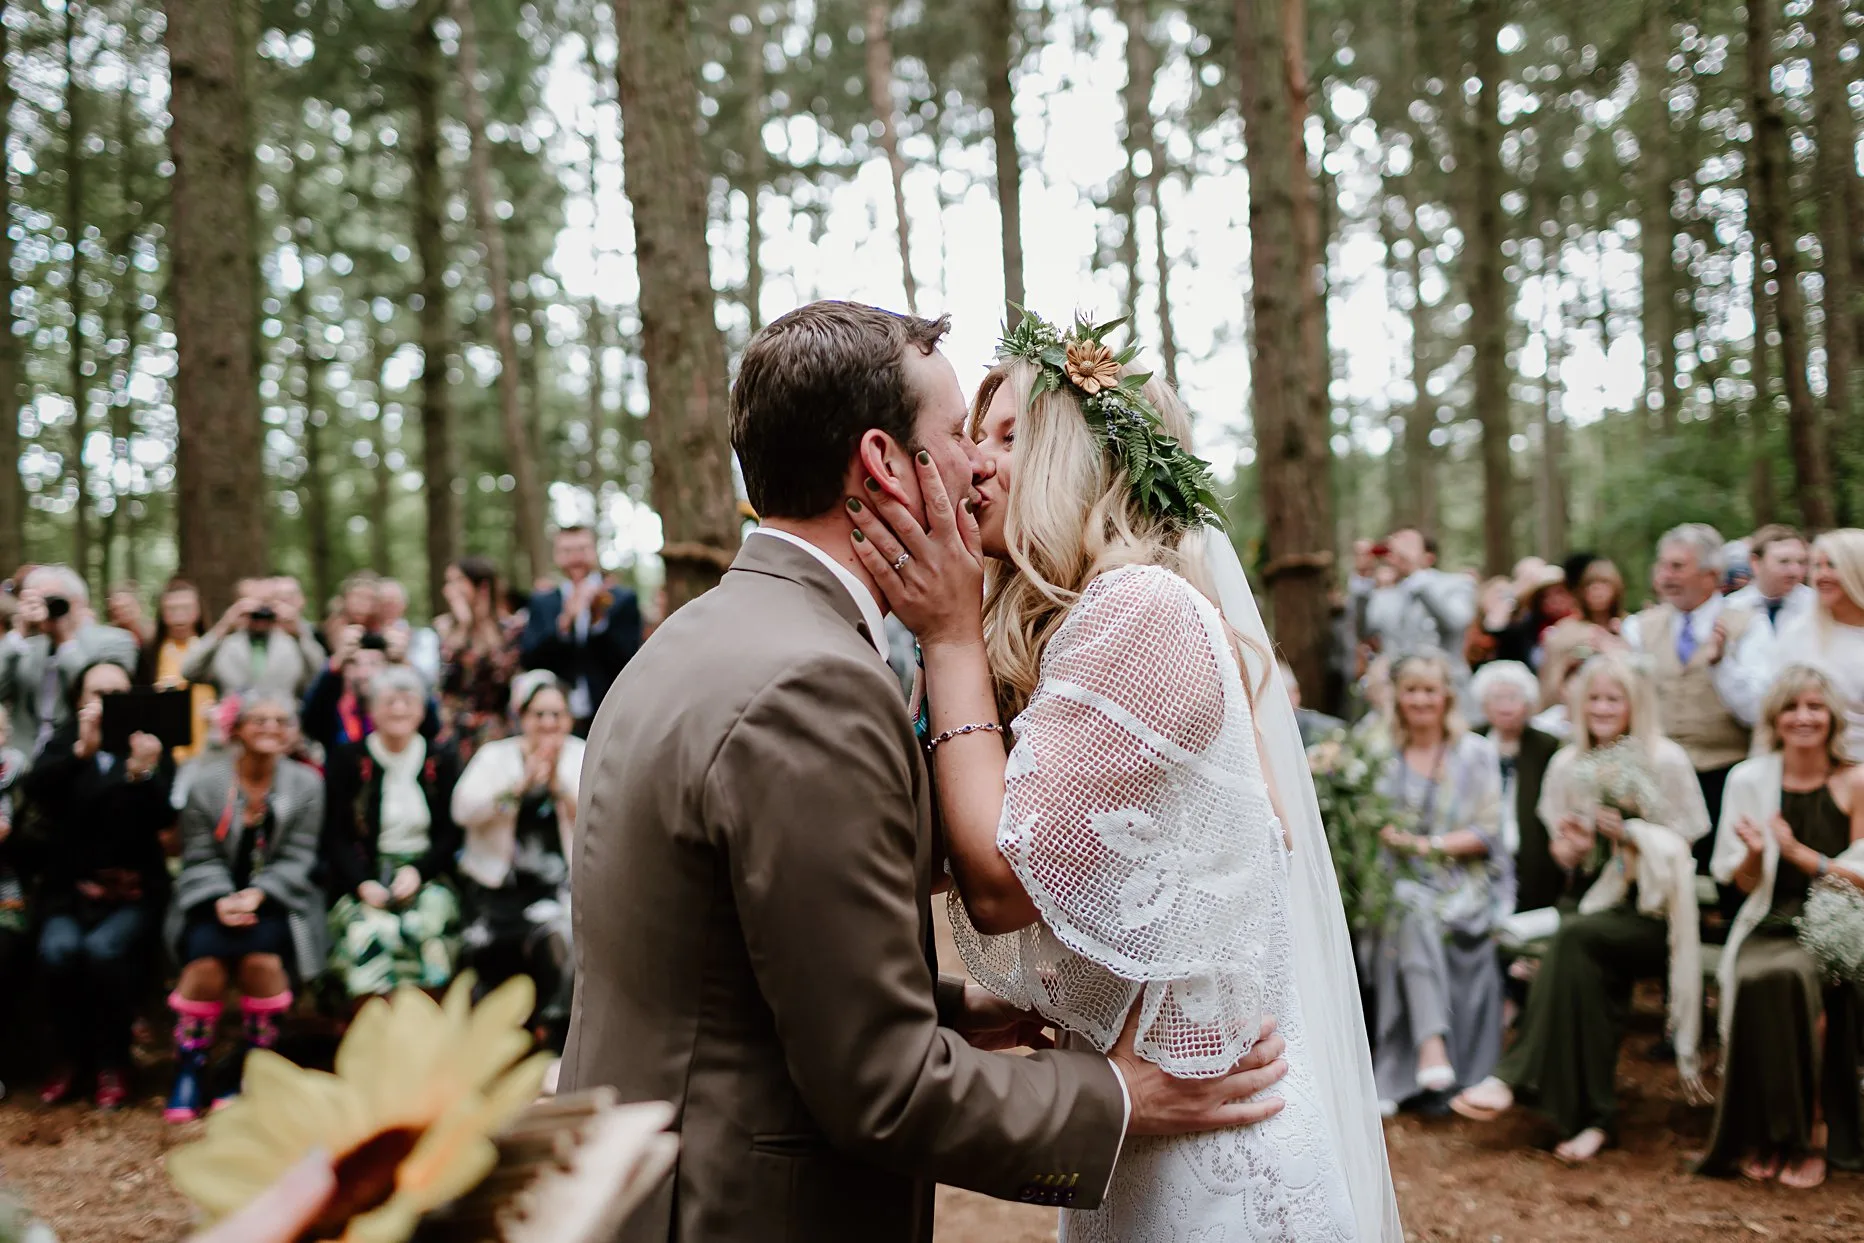 Bride and groom having their first kiss    during outside ceremony in the woods. Wedding guests are in the background clapping and everyone is surrounded by trees.